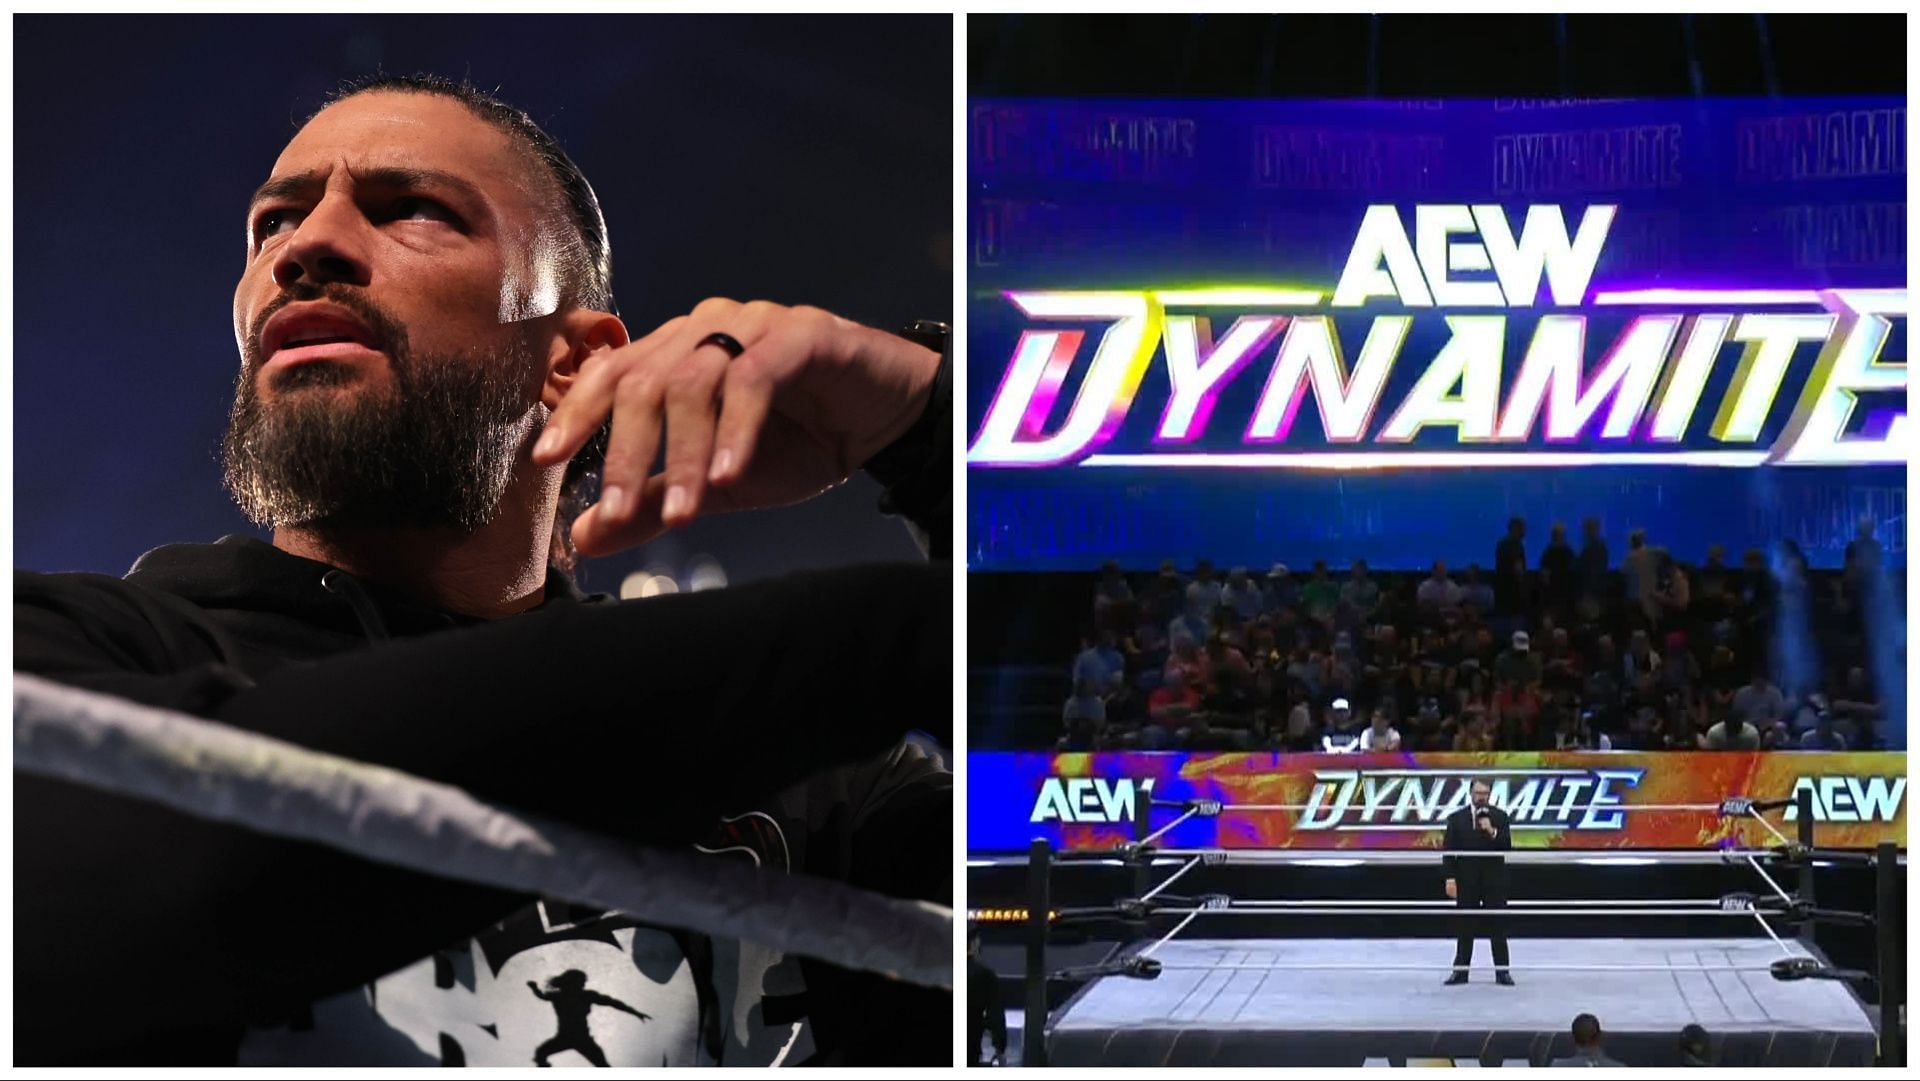 Roman Reigns on WWE SmackDown, AEW fans at a live Dynamite